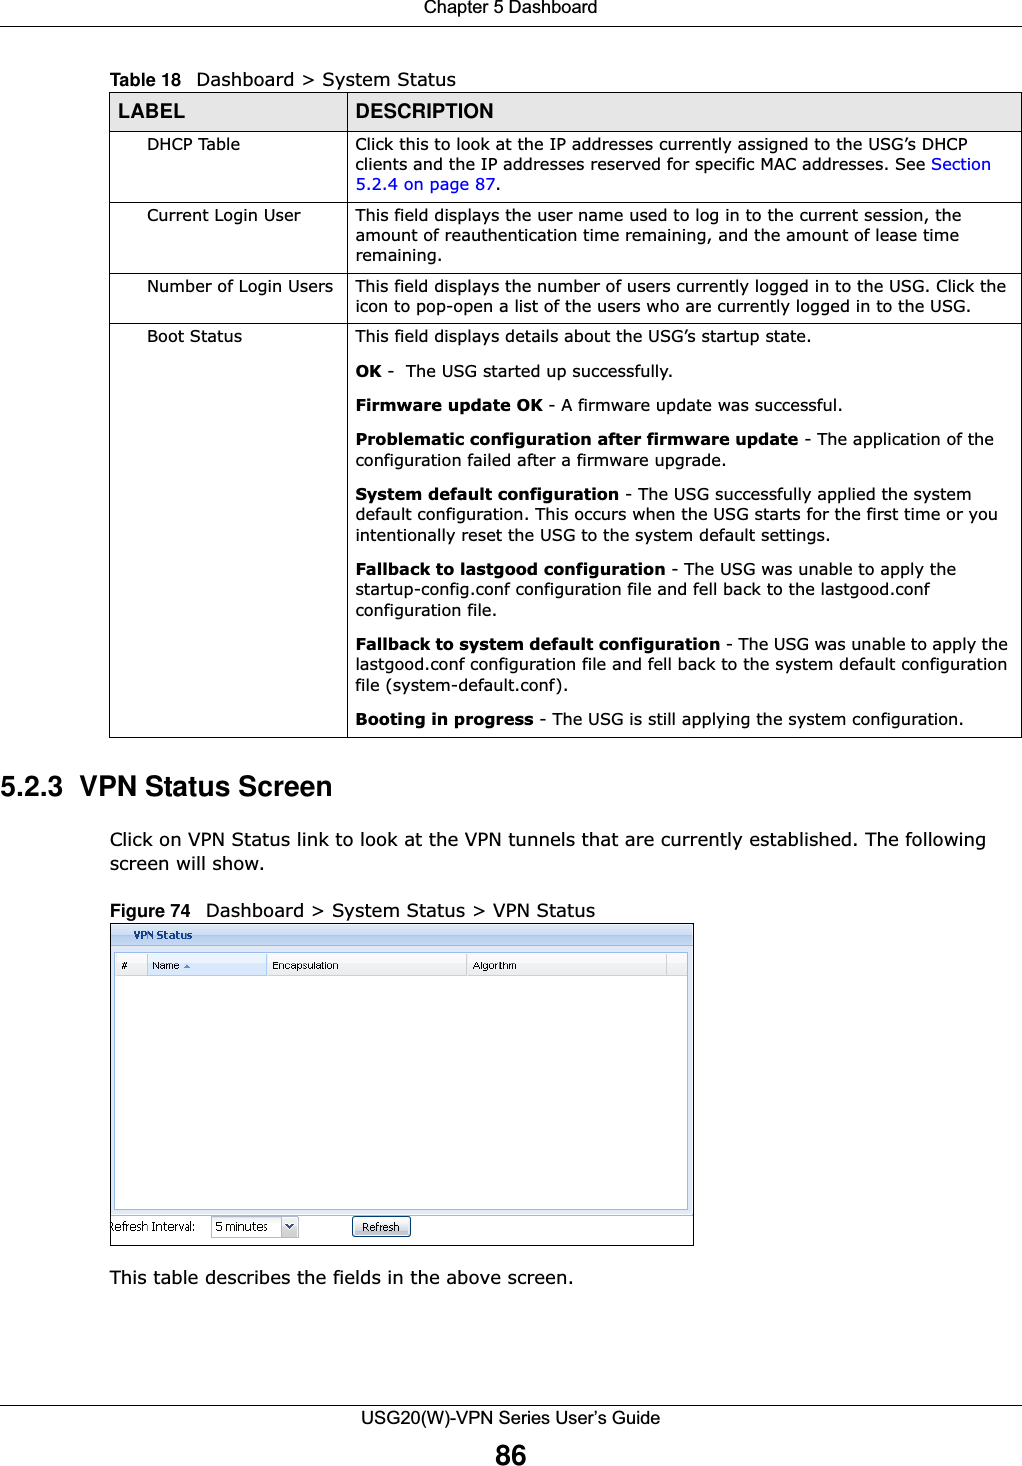 Chapter 5 DashboardUSG20(W)-VPN Series User’s Guide865.2.3  VPN Status ScreenClick on VPN Status link to look at the VPN tunnels that are currently established. The following screen will show. Figure 74   Dashboard &gt; System Status &gt; VPN Status This table describes the fields in the above screen.DHCP Table Click this to look at the IP addresses currently assigned to the USG’s DHCP clients and the IP addresses reserved for specific MAC addresses. See Section 5.2.4 on page 87.Current Login User This field displays the user name used to log in to the current session, the amount of reauthentication time remaining, and the amount of lease time remaining. Number of Login Users This field displays the number of users currently logged in to the USG. Click the icon to pop-open a list of the users who are currently logged in to the USG. Boot Status This field displays details about the USG’s startup state.OK -  The USG started up successfully.Firmware update OK - A firmware update was successful.Problematic configuration after firmware update - The application of the configuration failed after a firmware upgrade.System default configuration - The USG successfully applied the system default configuration. This occurs when the USG starts for the first time or you intentionally reset the USG to the system default settings.Fallback to lastgood configuration - The USG was unable to apply the startup-config.conf configuration file and fell back to the lastgood.conf configuration file.Fallback to system default configuration - The USG was unable to apply the lastgood.conf configuration file and fell back to the system default configuration file (system-default.conf).Booting in progress - The USG is still applying the system configuration.Table 18   Dashboard &gt; System StatusLABEL DESCRIPTION